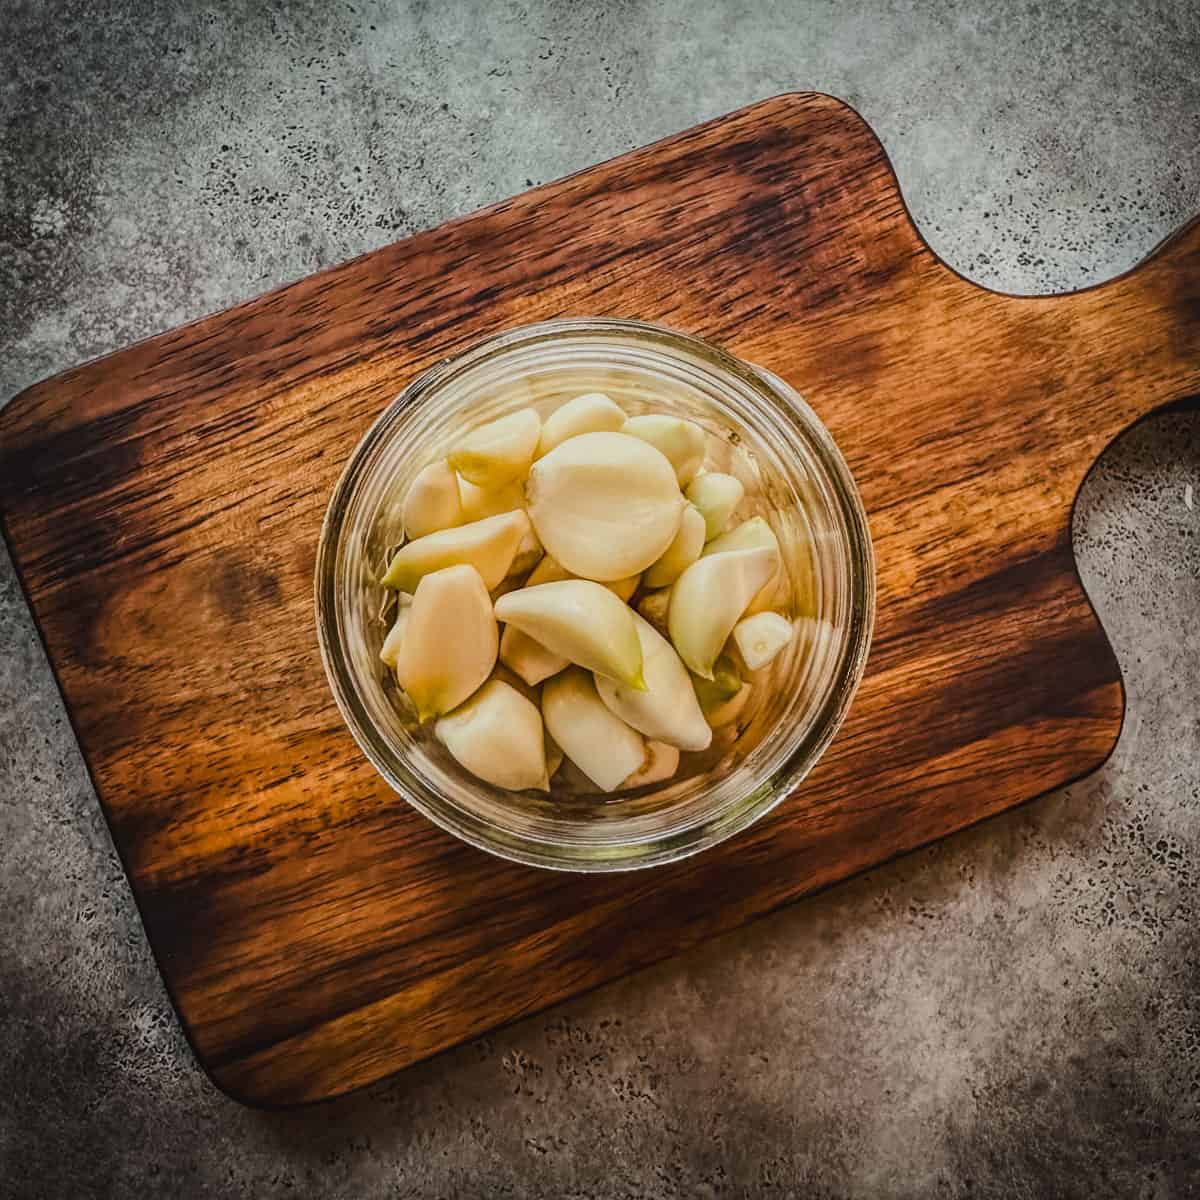 Peeled garlic cloves in a pint jar on a wood cutting board, top view.